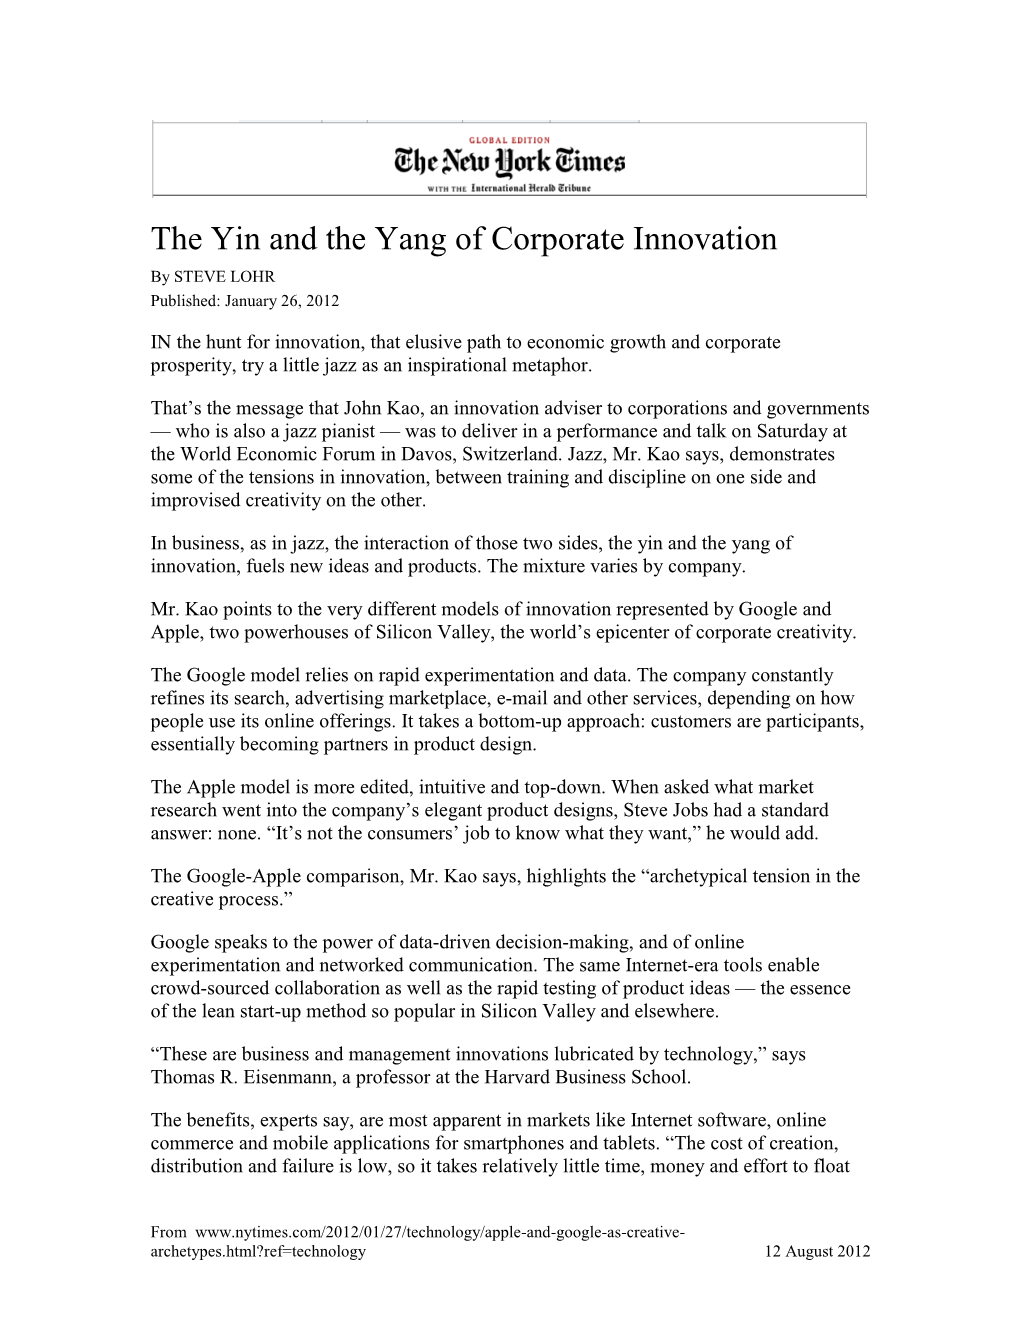 The Yin and the Yang of Corporate Innovation by STEVE LOHR Published: January 26, 2012